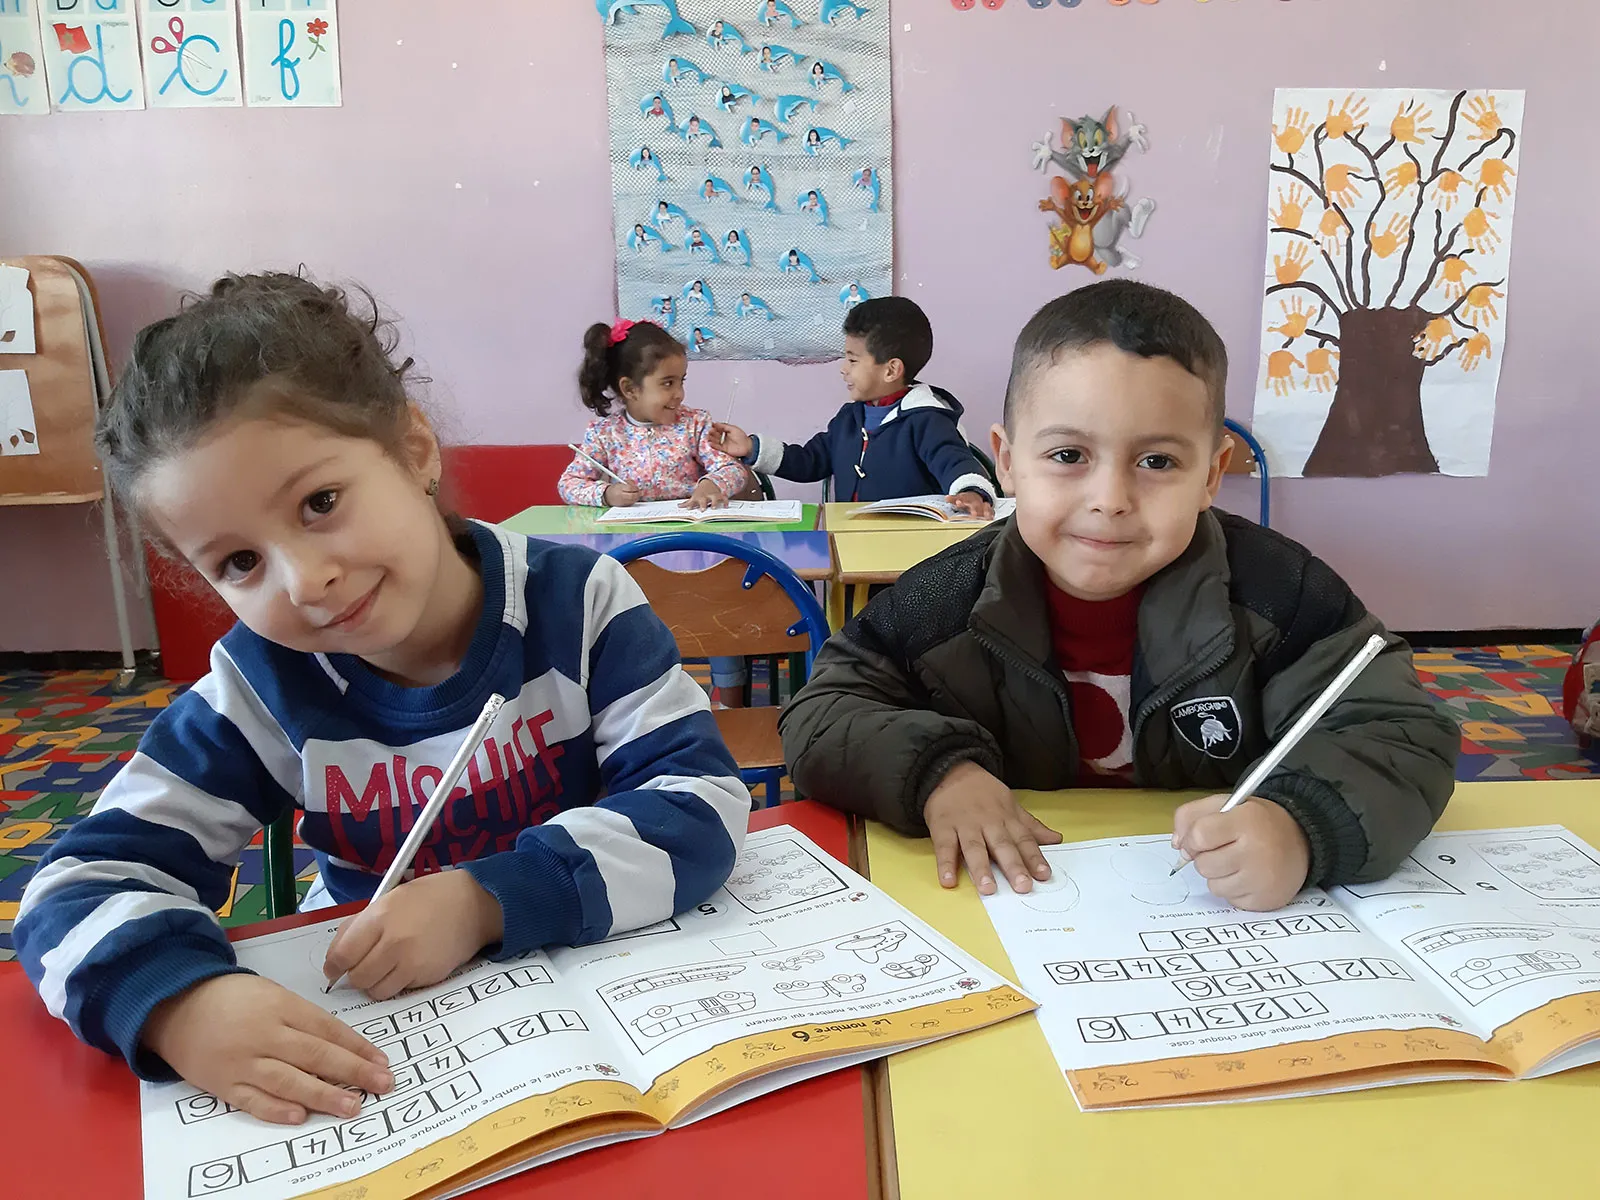 A young Moroccan boy and girl sit together at a desk and fill out worksheets.